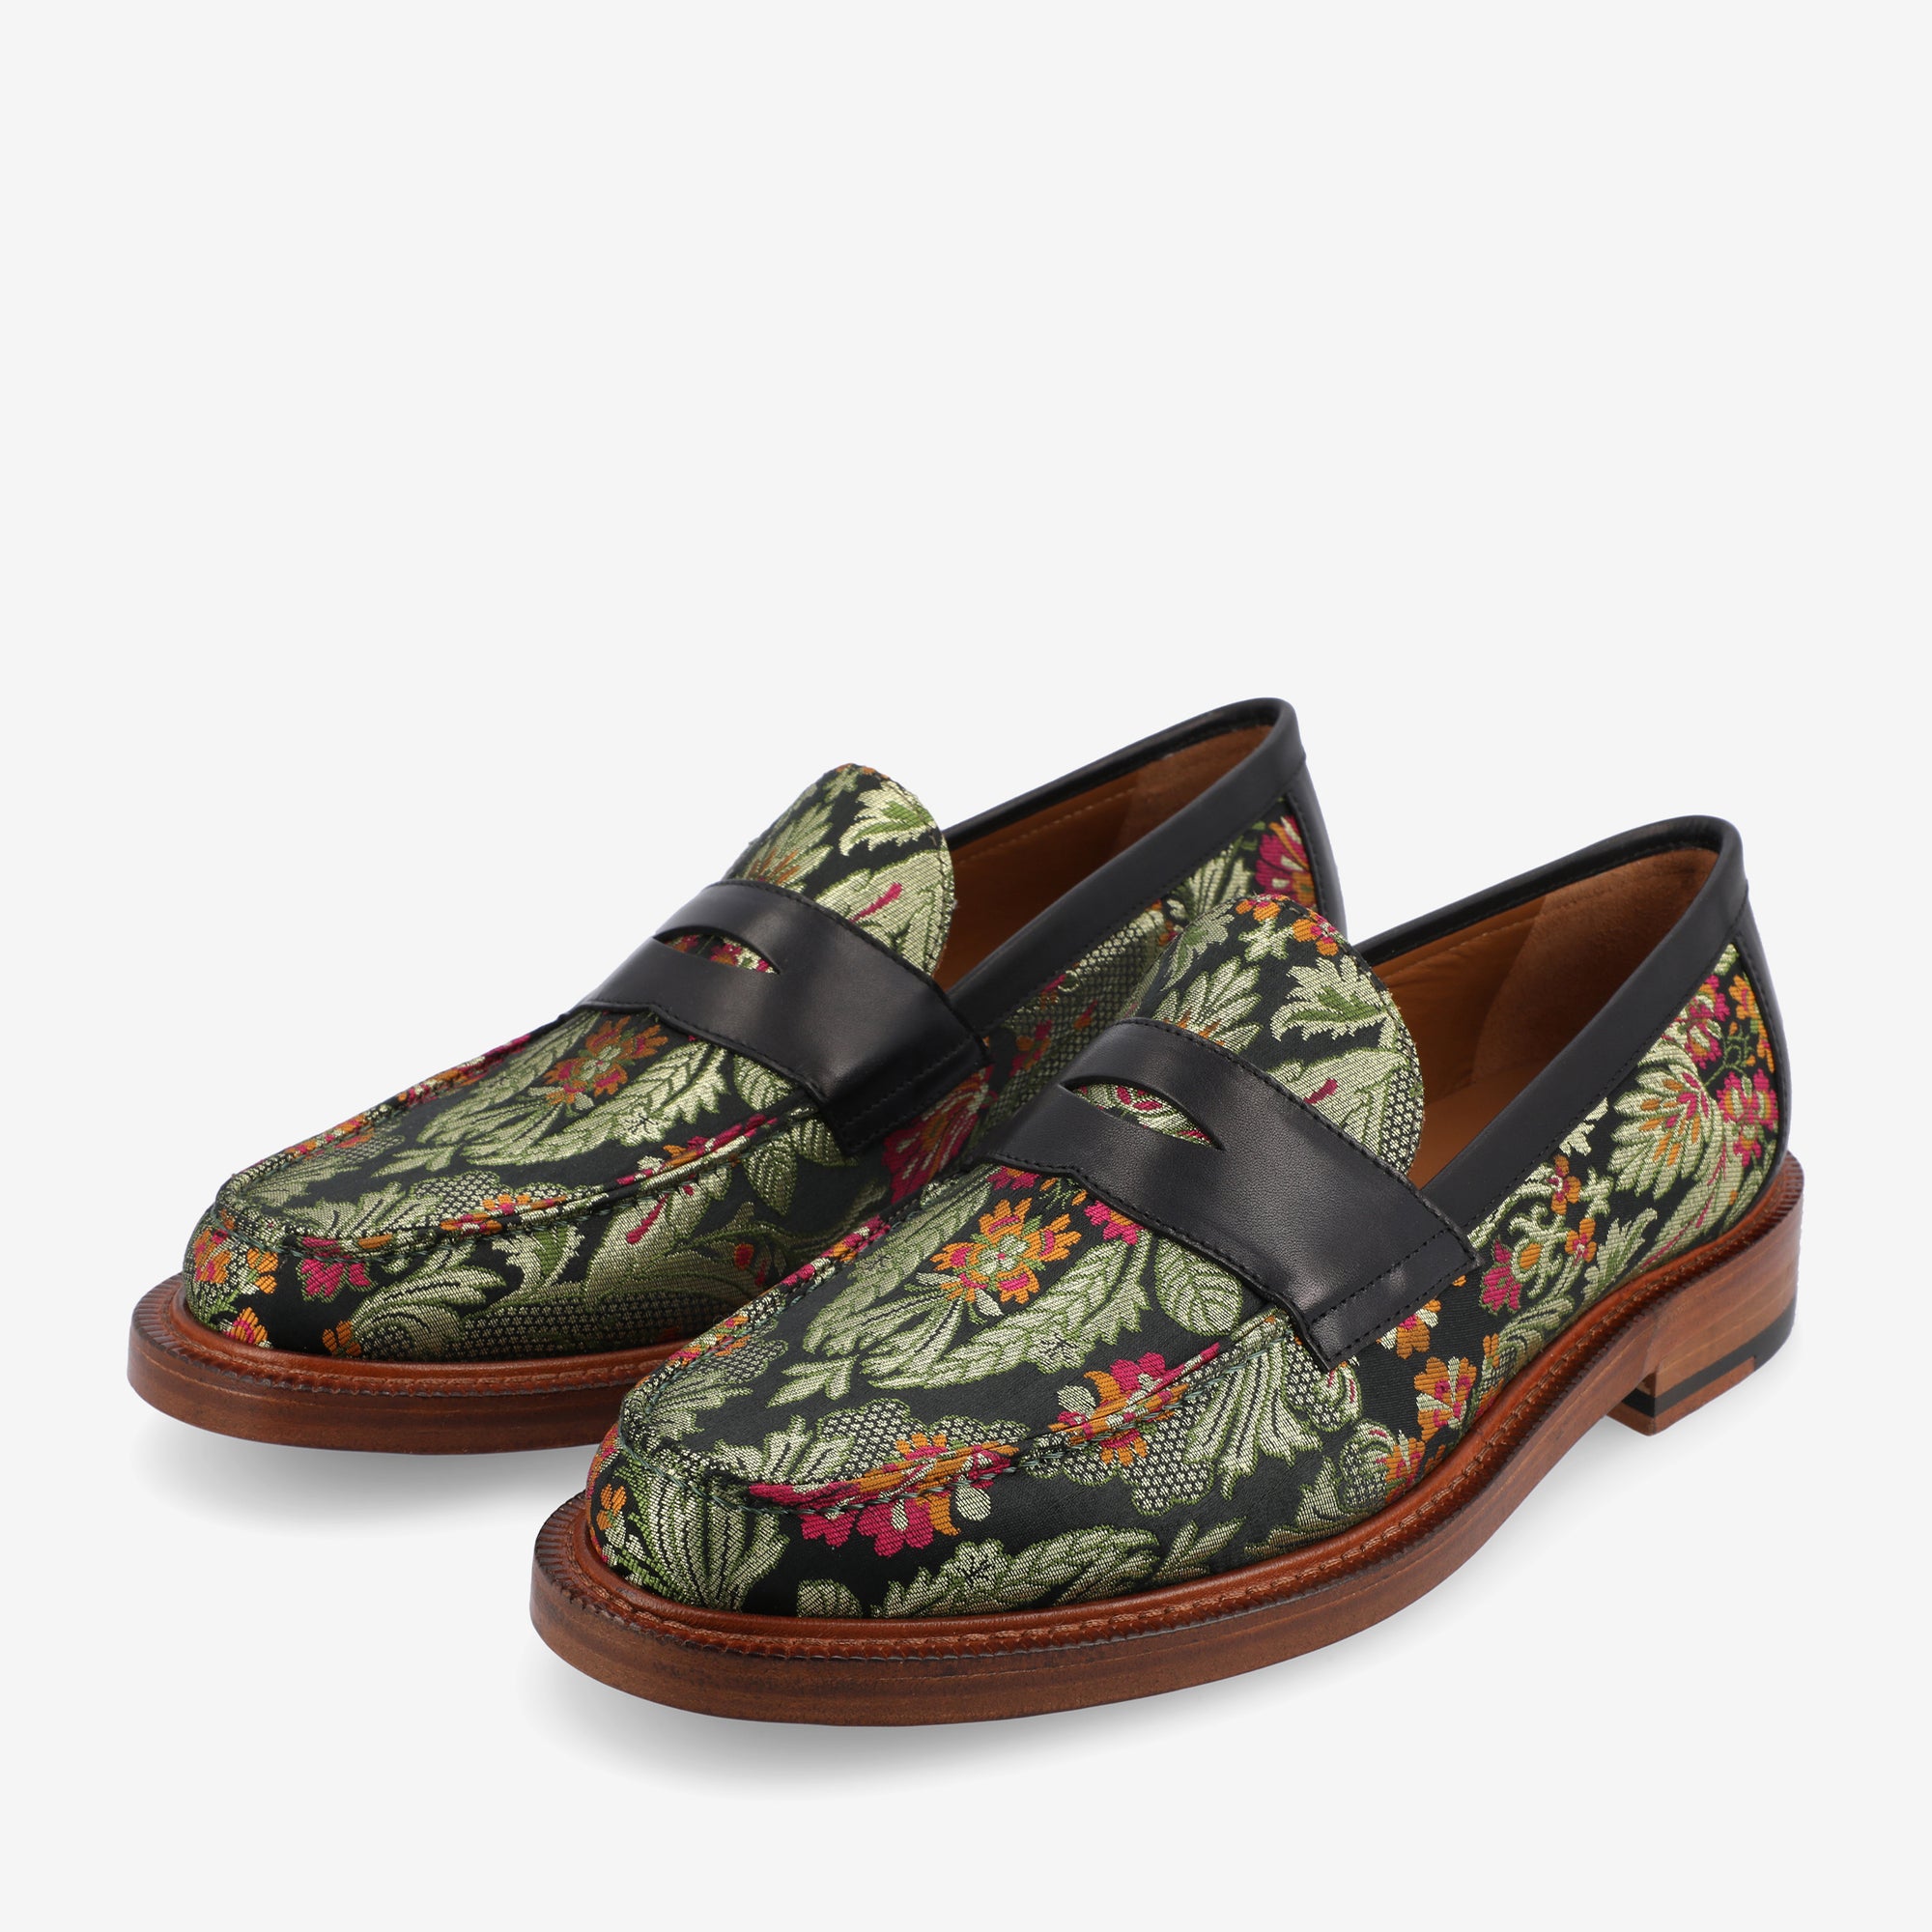 The Fitz Loafer in Victoria